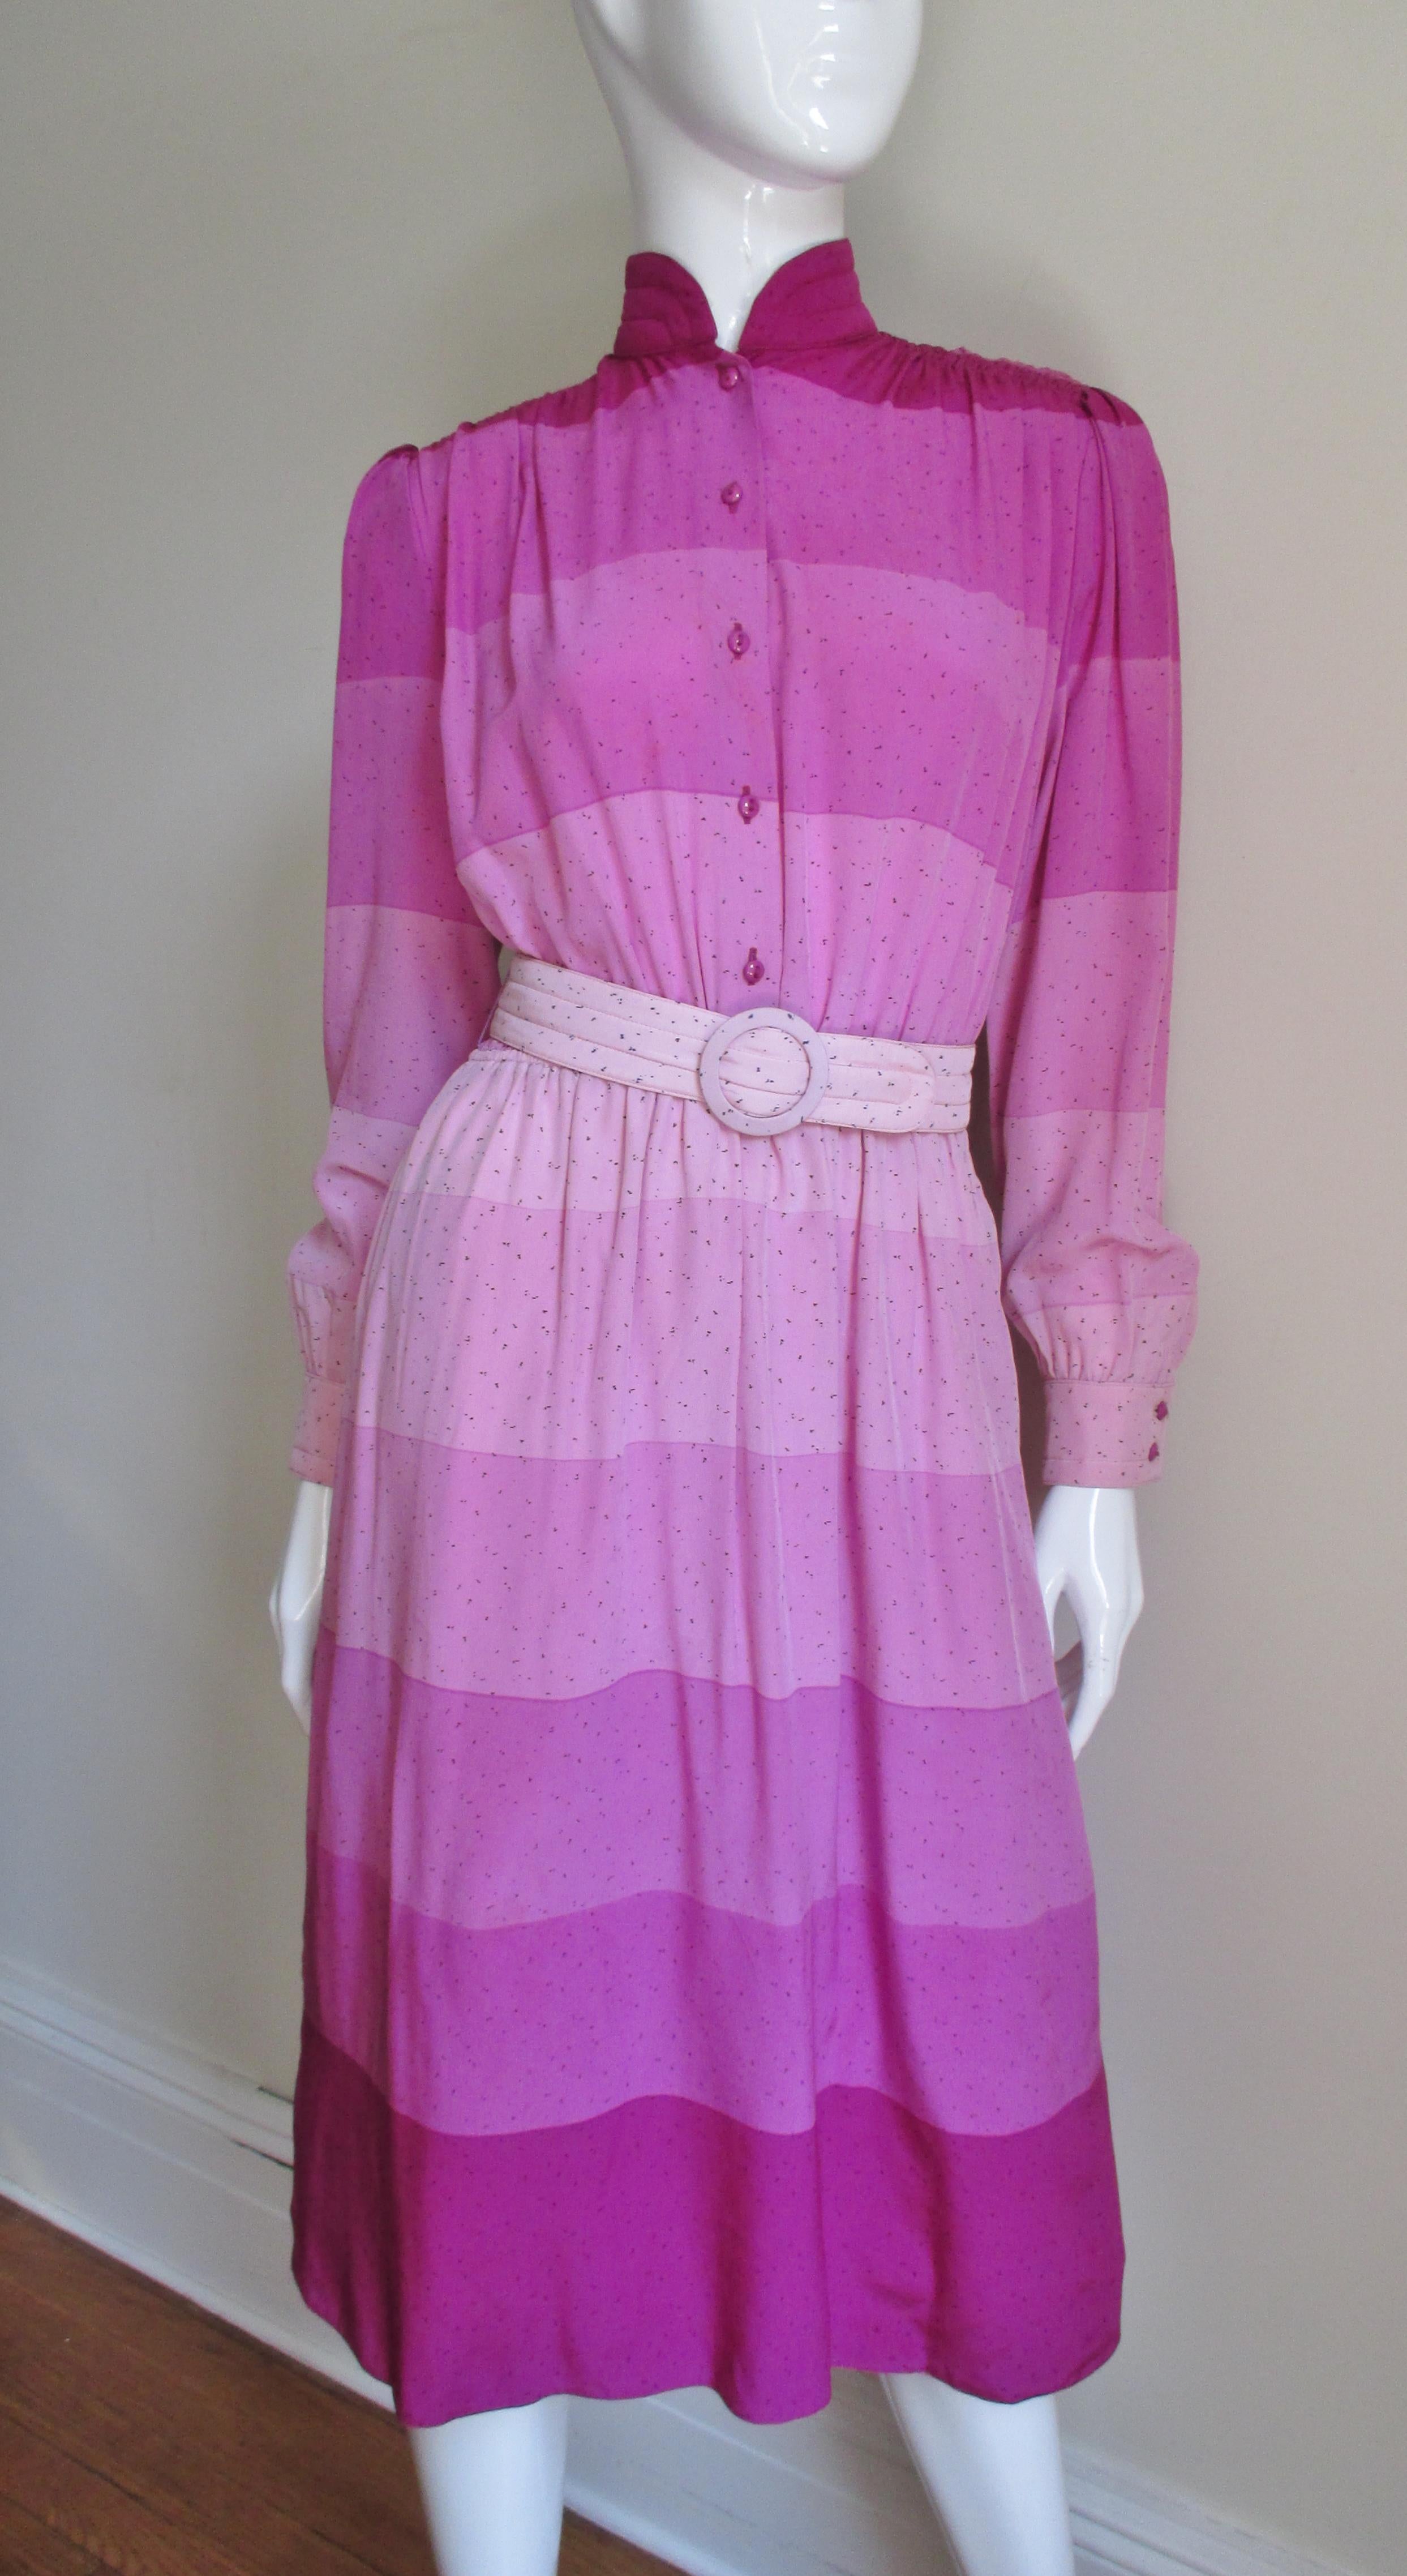 A beautiful silk dress in wide horizontal gradated stripes in shades of pink from Louis Feraud.   It is a long sleeve shirtwaist style dress with a stand up collar, matching buttons on the front and cuffs plus a matching belt.  Easy and comfortable